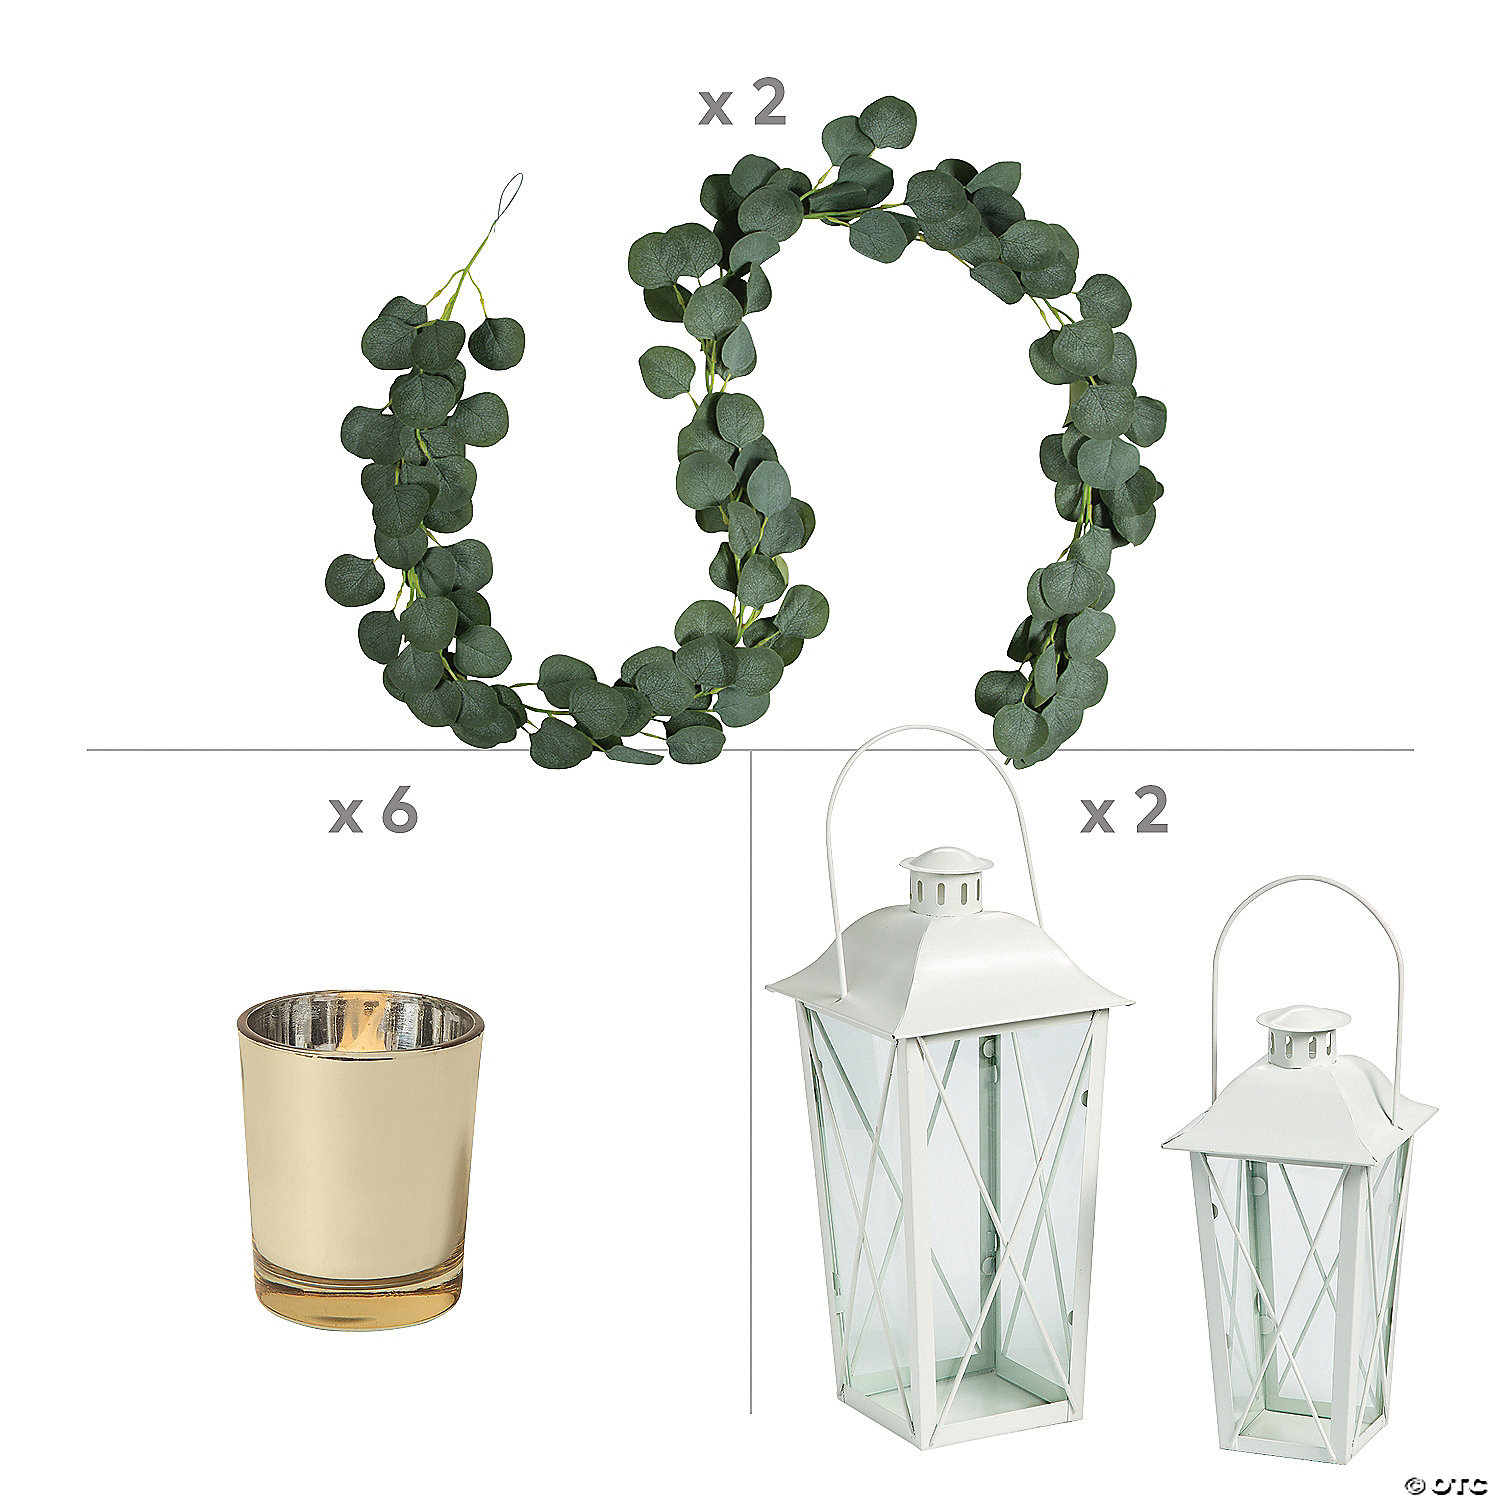 This wedding eucalyptus table decoration set is the perfect addition to any wedding. It includes eucalyptus branches, lanterns and other decorations that can be used to create a beautiful and elegant table decoration. This set of decorations is easy to assemble and disassemble, so you can create a beautiful table decoration in minutes. This decoration is the perfect addition to any wedding and is sure to impress your guests.